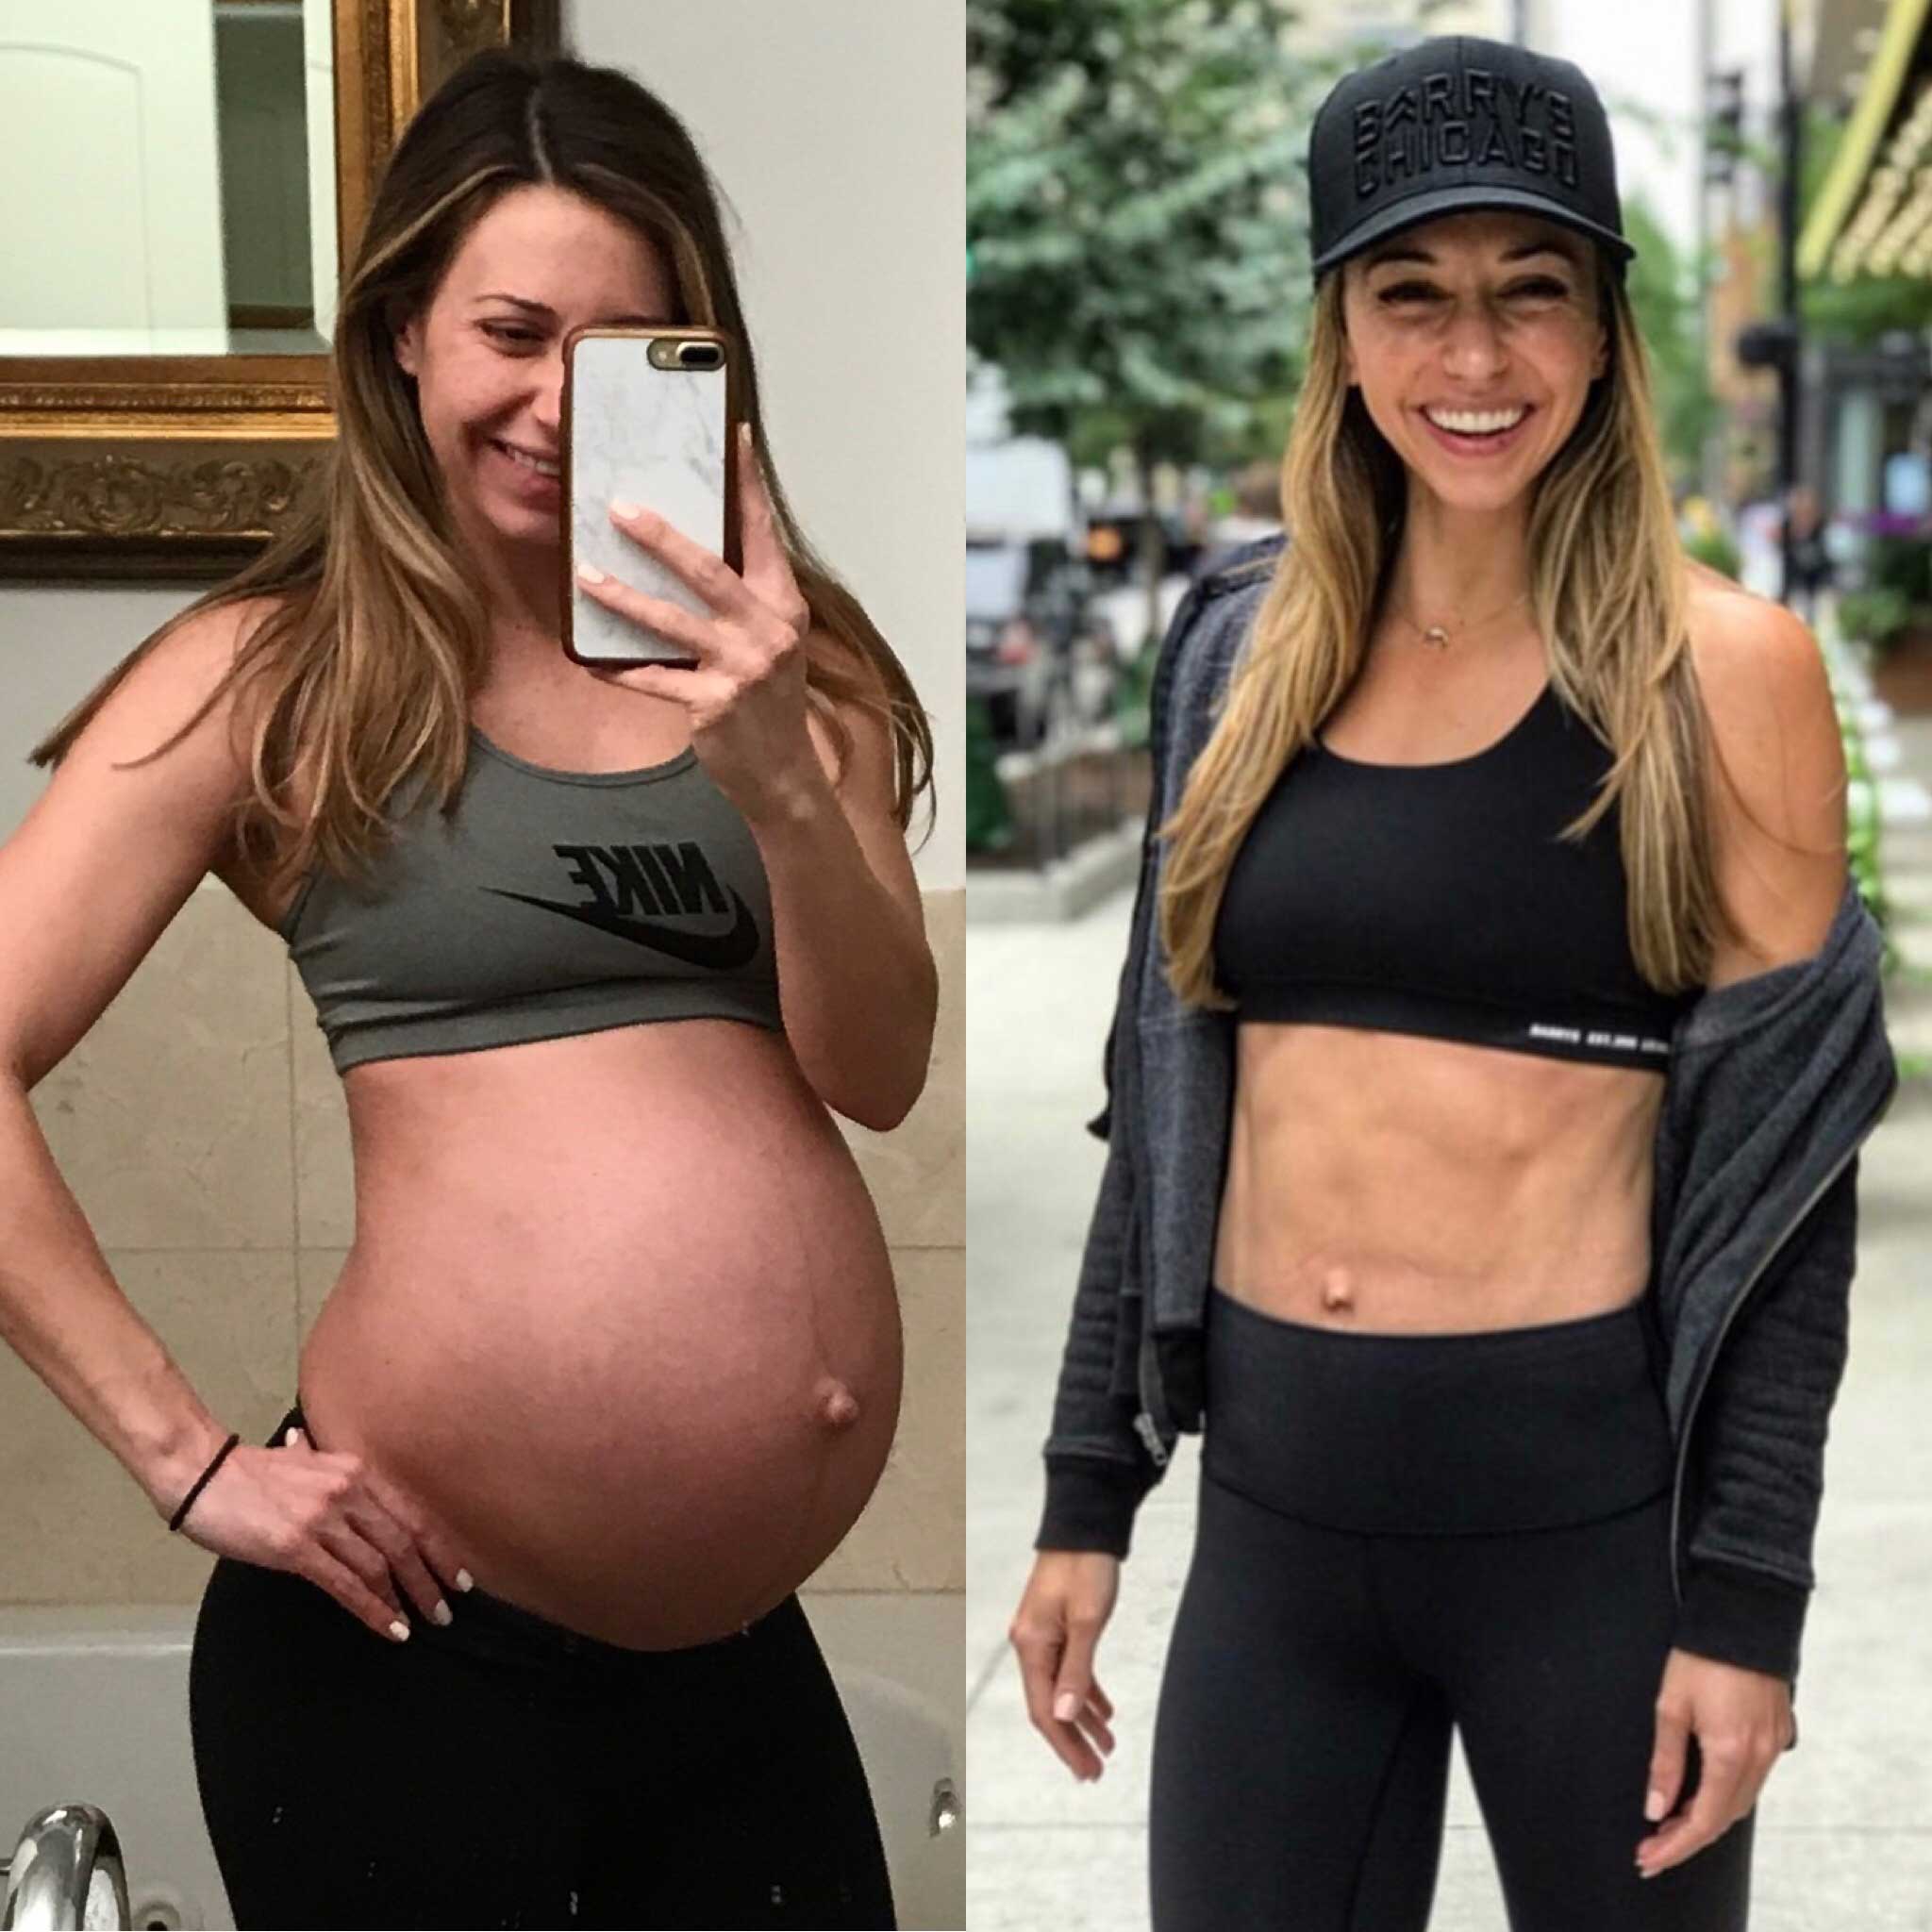 https://www.taylorwalkerfit.com/wp-content/uploads/2019/02/A-Guideline-For-Postpartum-Fitness-by-Kate-Lemere-pregnancy-post-partum.jpg